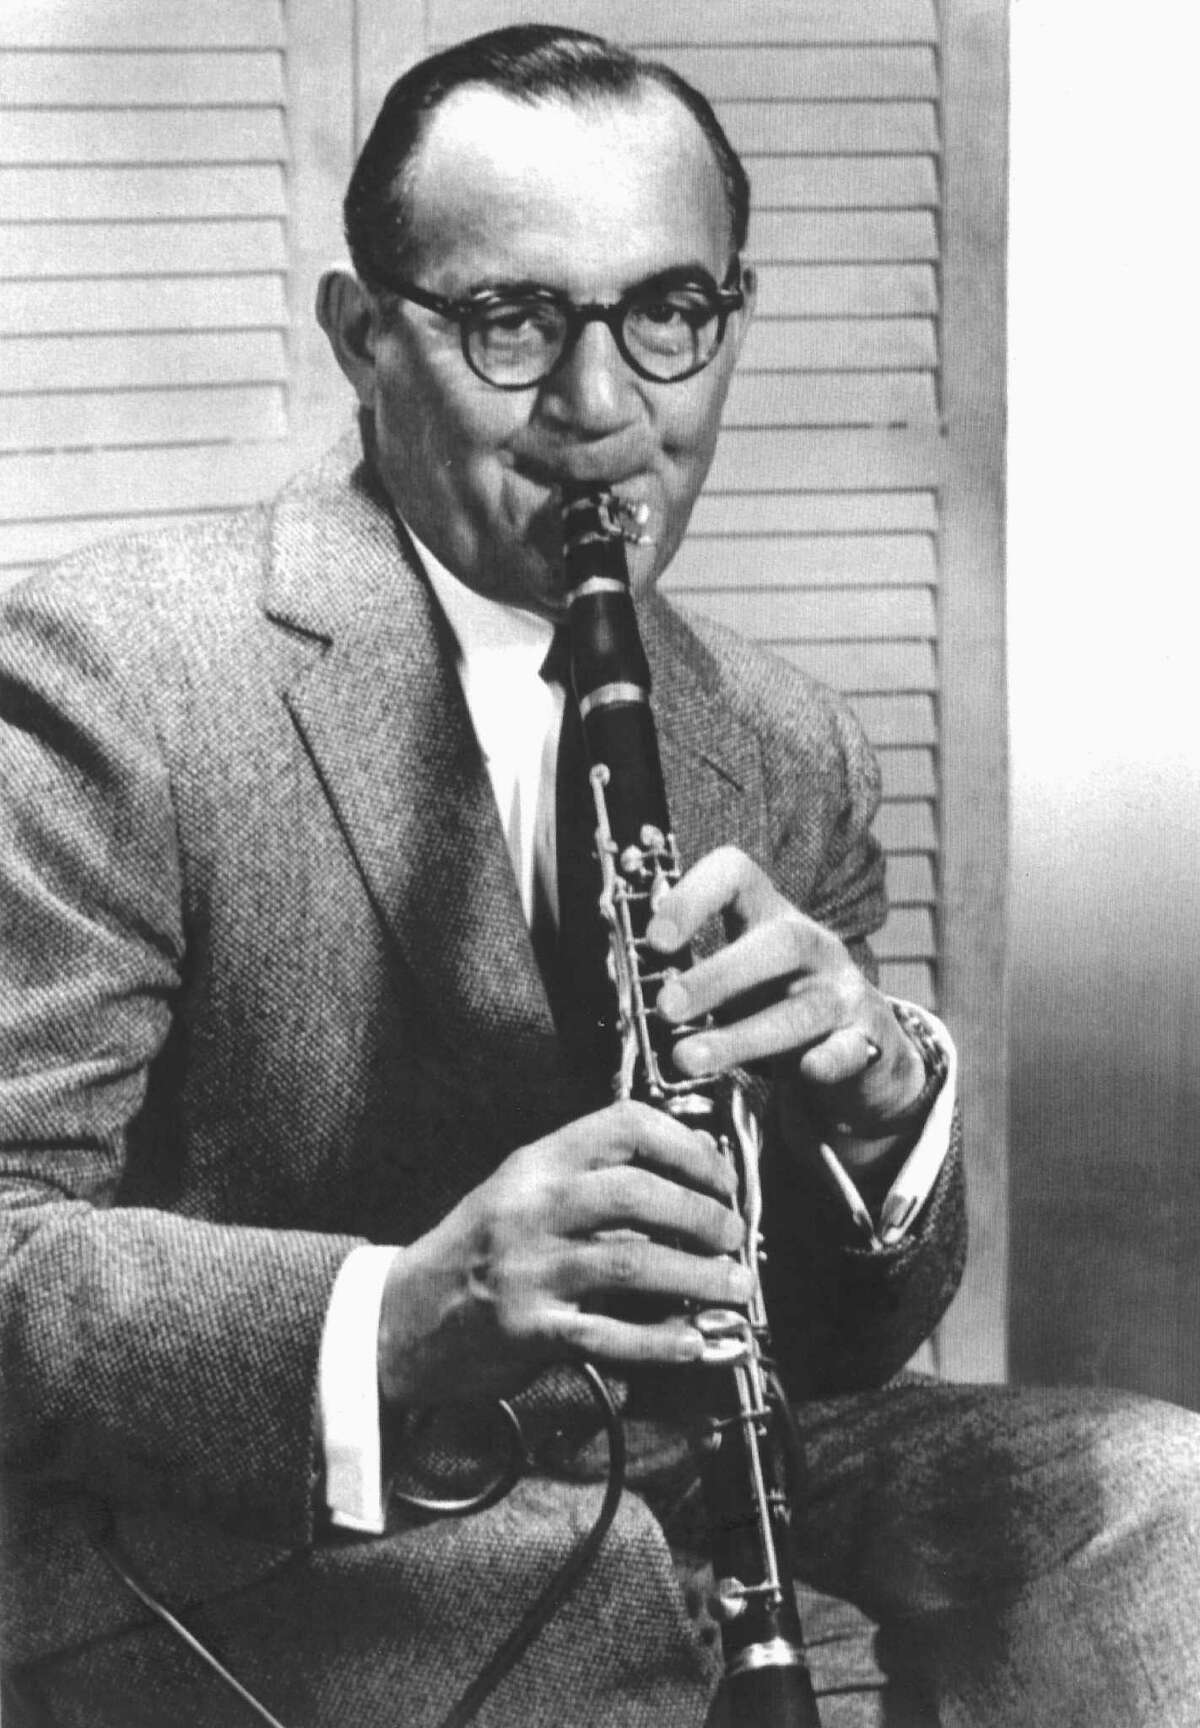 Benny Goodman lived on Rock Rimmon Road in Stamford, Conn., from the 1950s until his death in 1986.